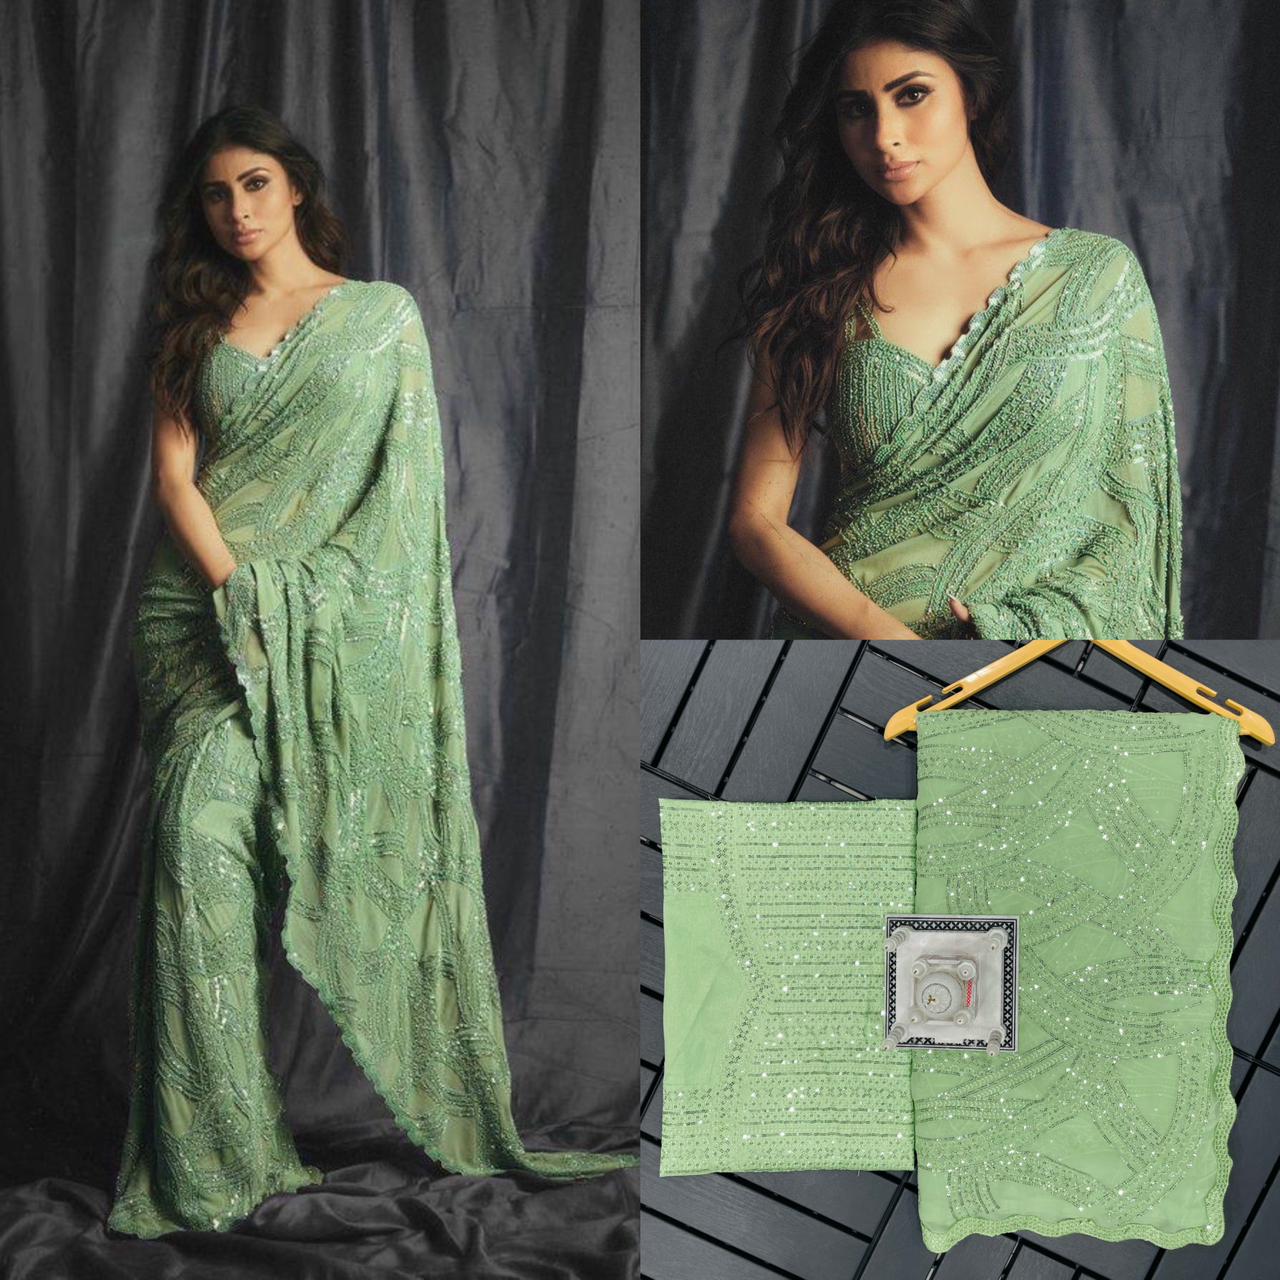 Mouni Roy EMBROIDERED ZARI & SEQUINS ALL OVER WORK WITH LACE BORDER SAREE INSPIRED BY CELEBRITY